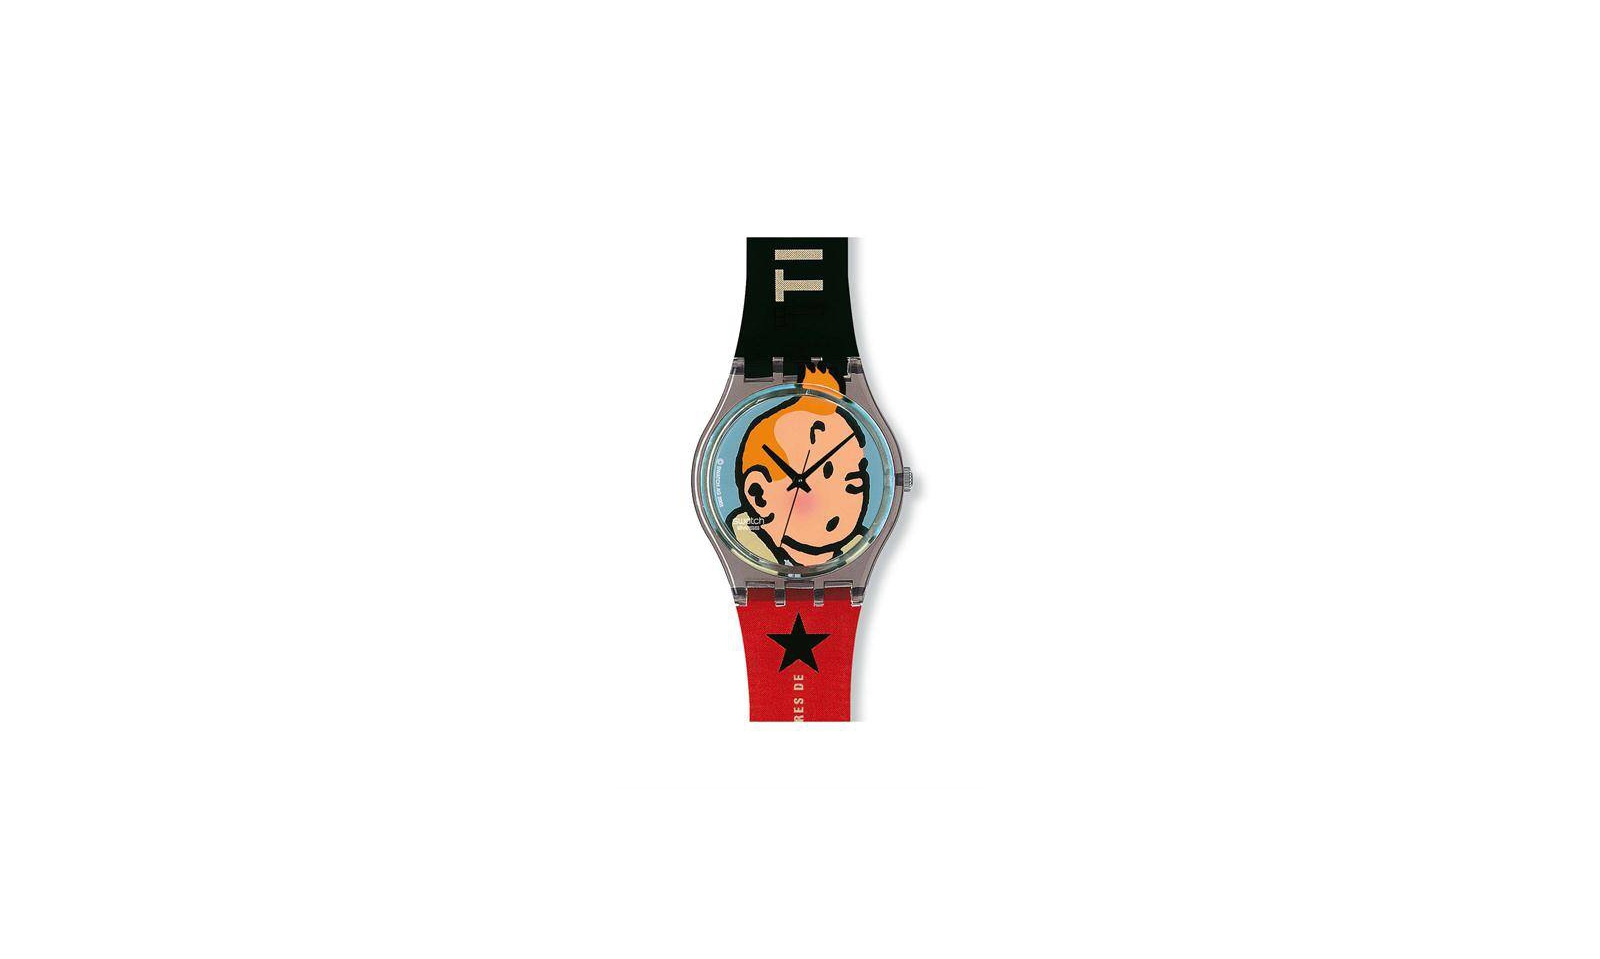 Tintin Swatch watch and Tintin magazine (Special Edition store